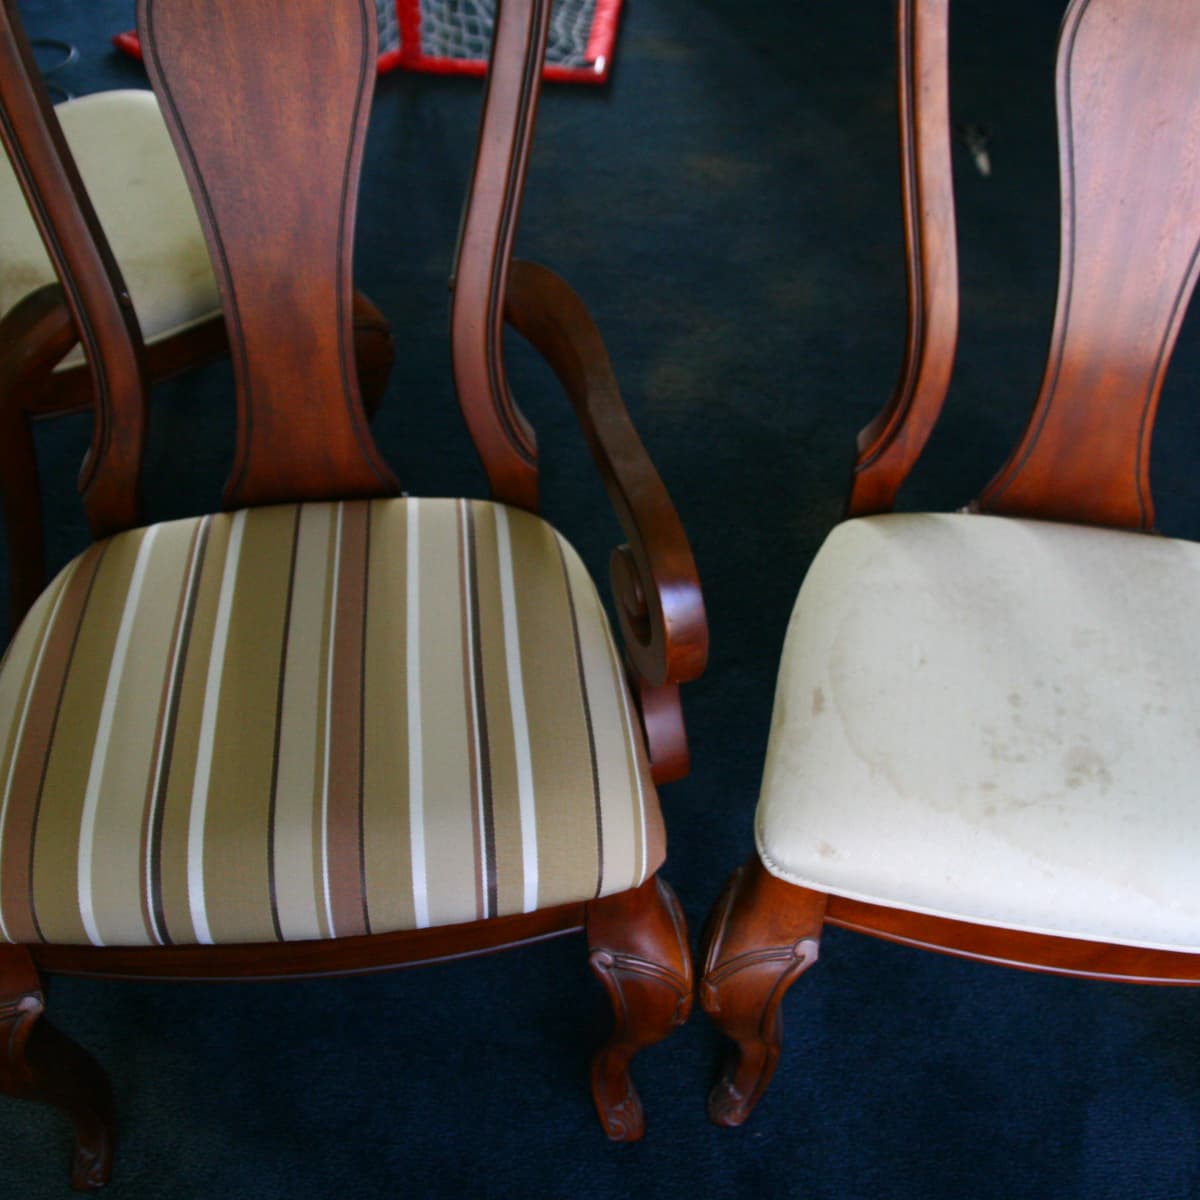 How To Reupholster A Dining Room Chair, Leather To Reupholster Dining Chairs